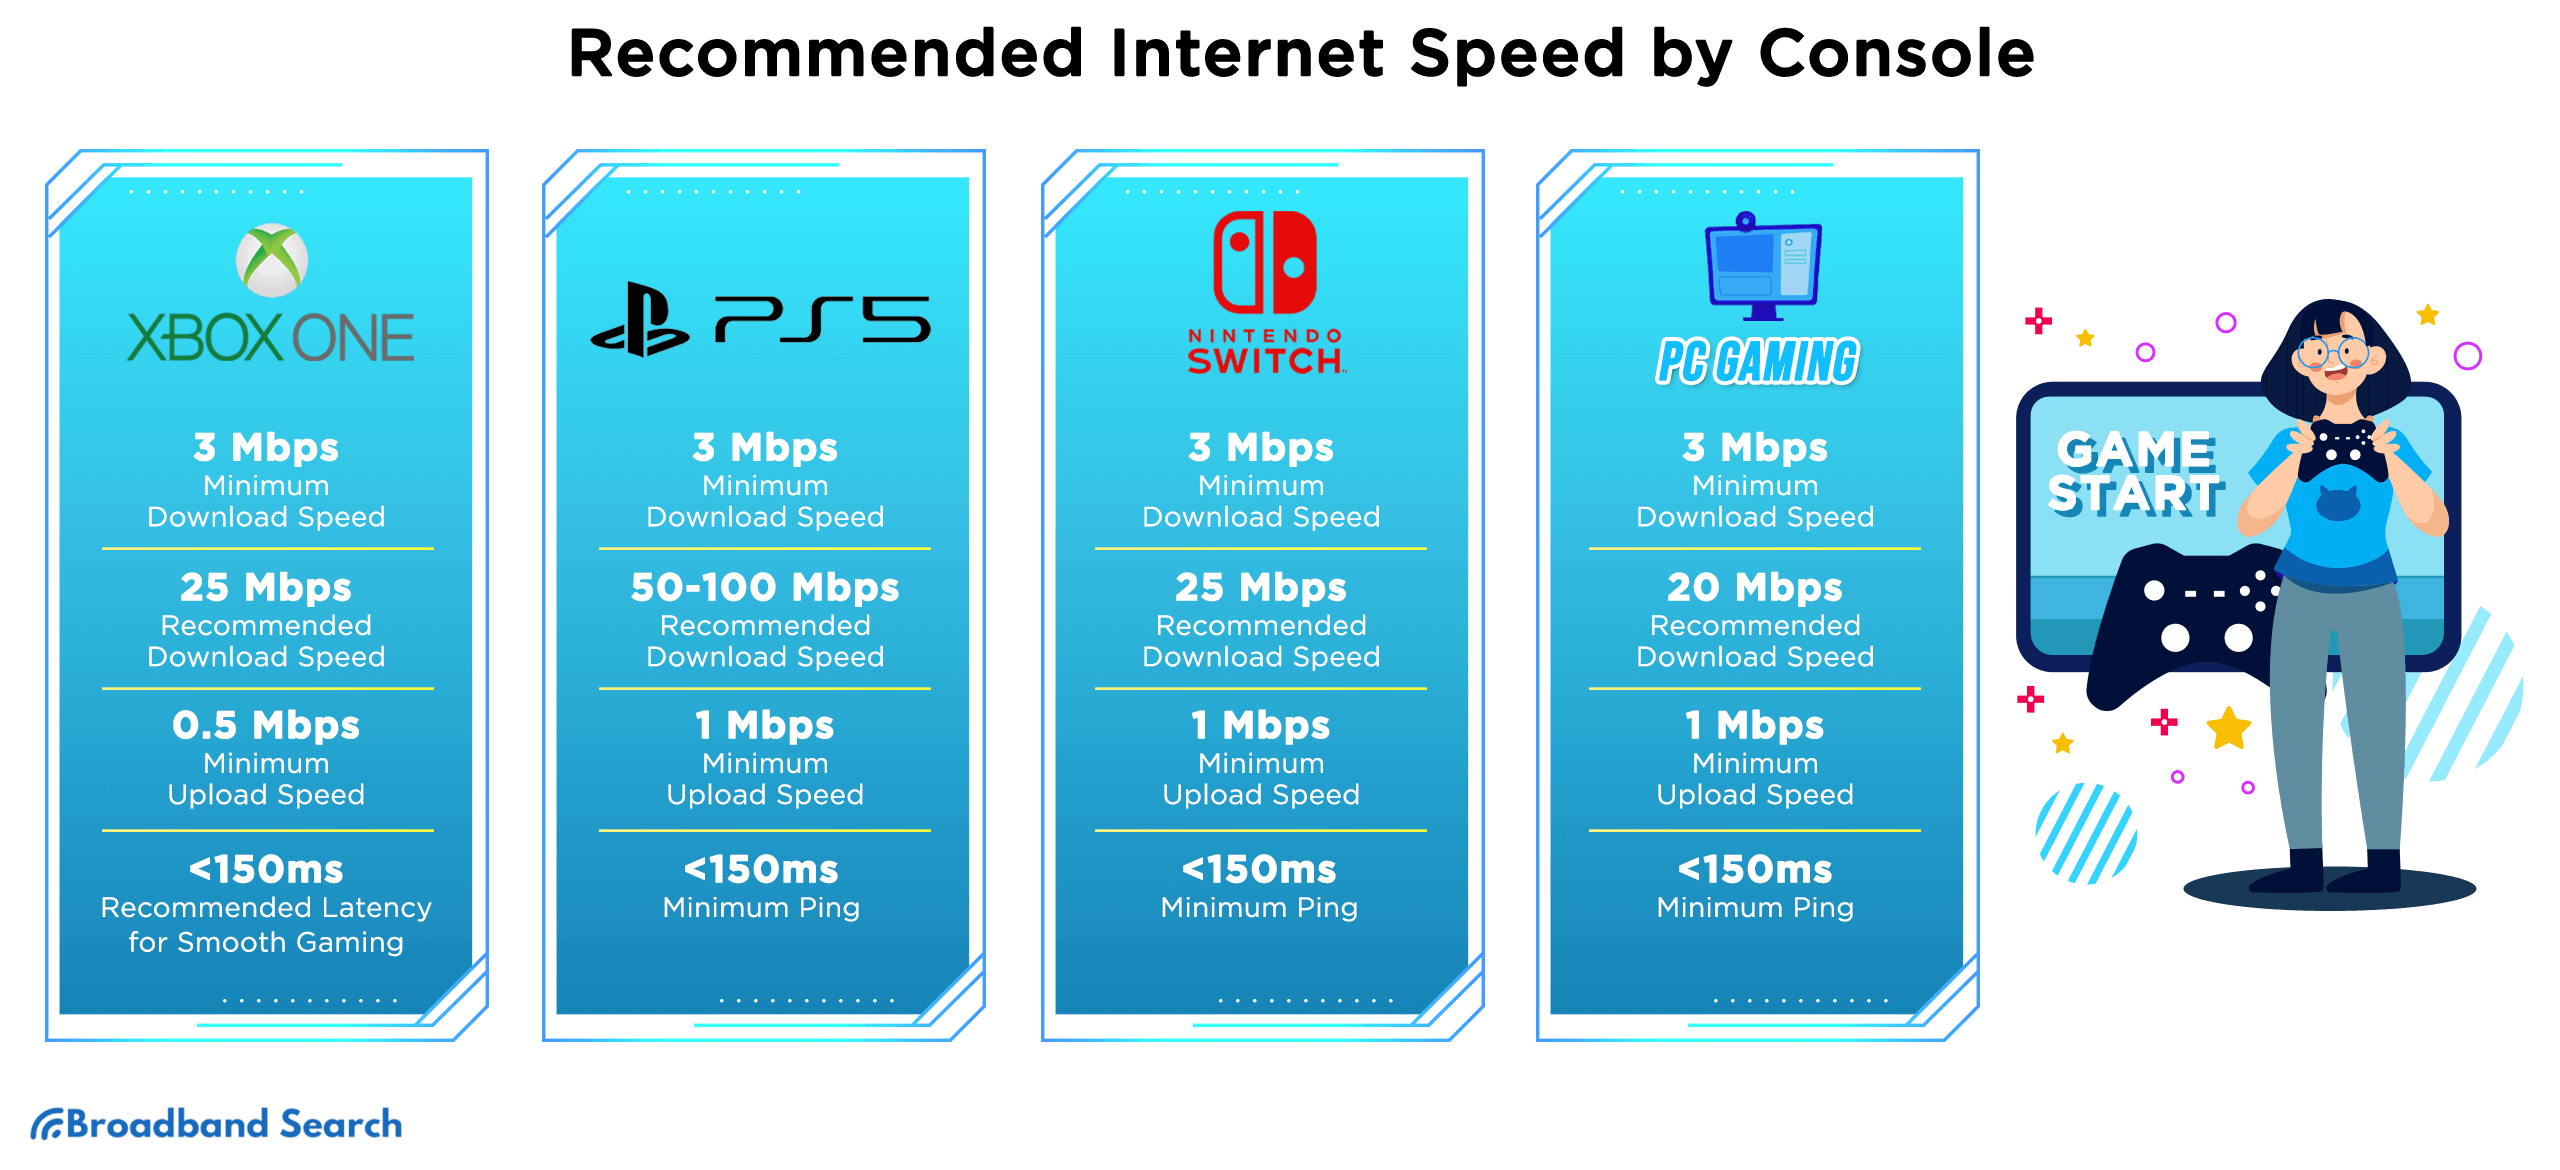 What's a good internet speed for online gaming? A Guide by Swoop